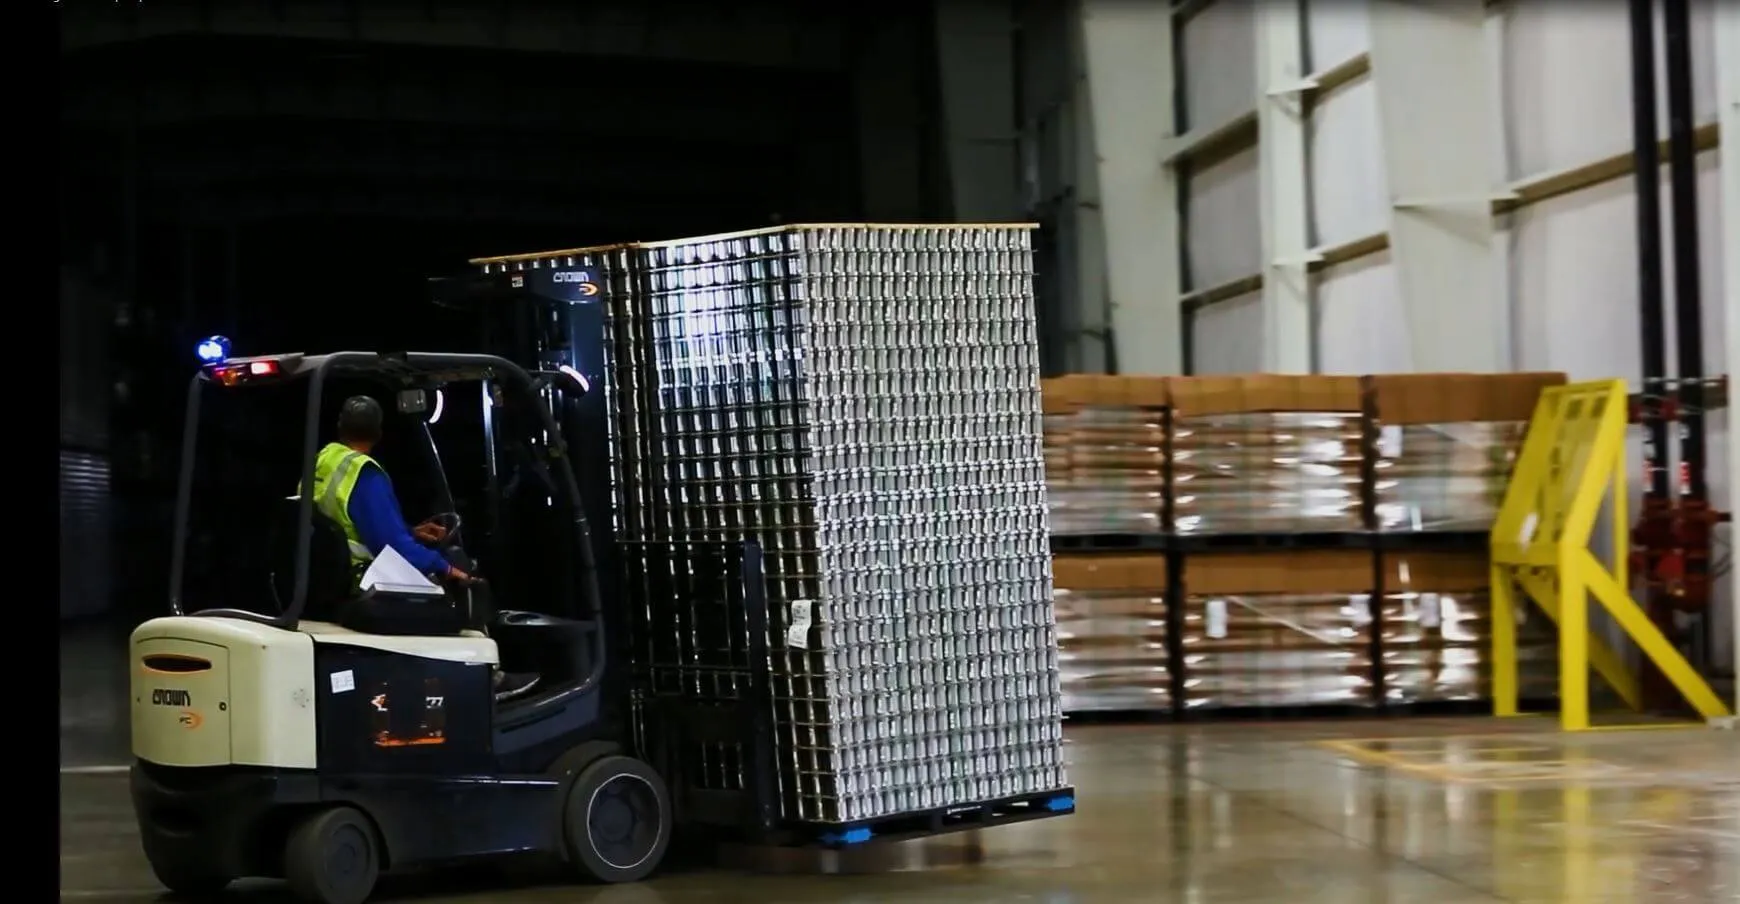 Forklift moving pallets of cans through a warehouse